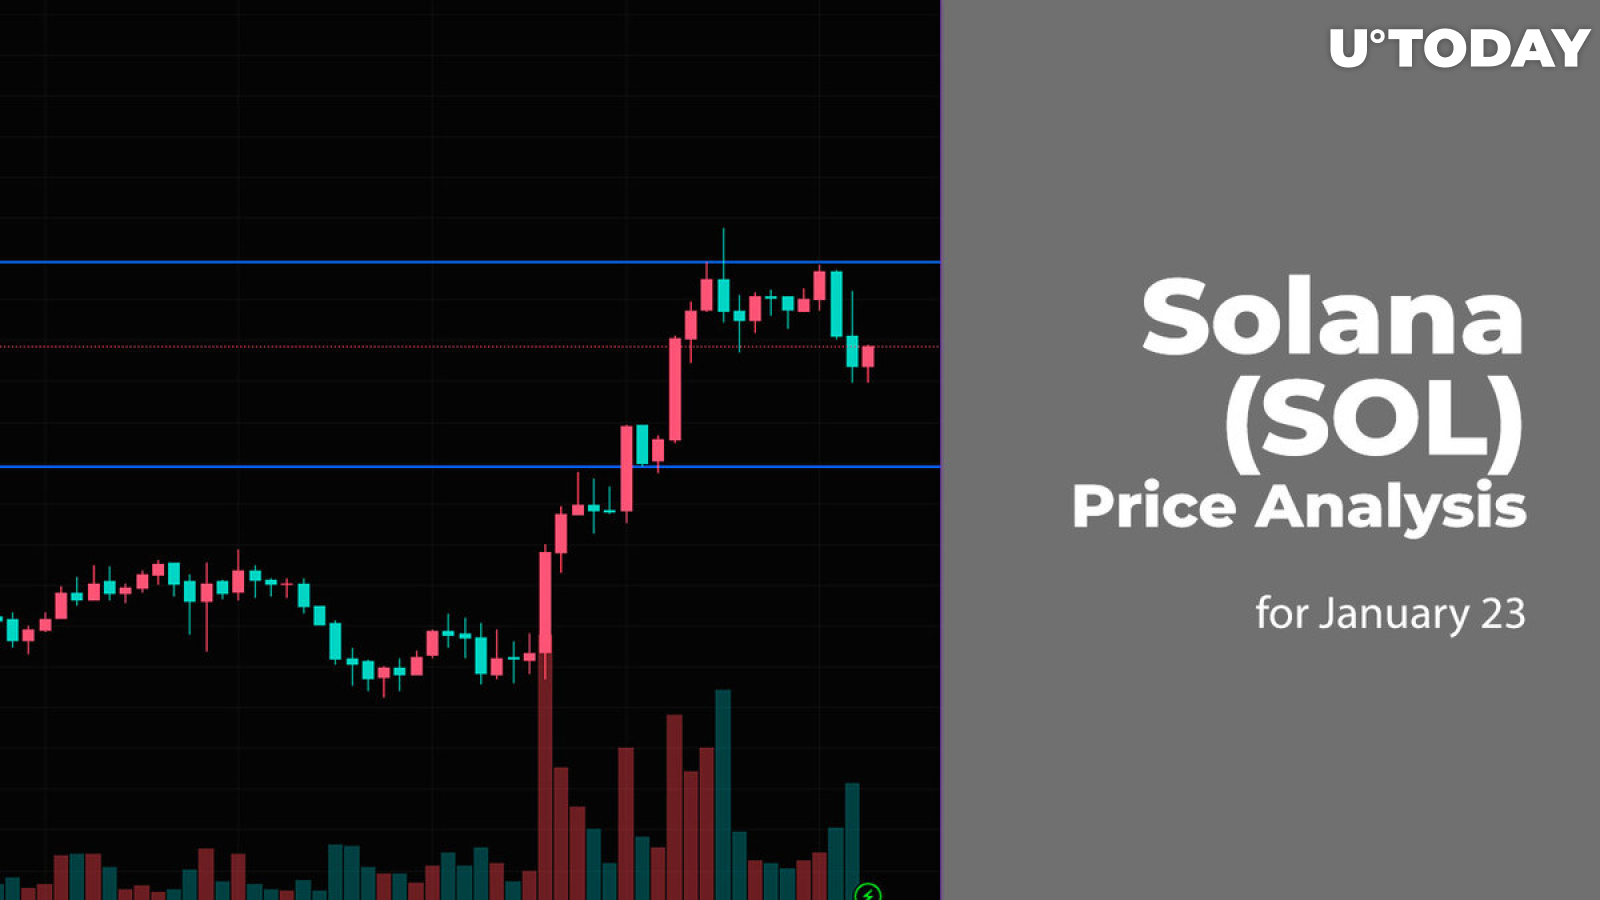 Solana (SOL) Price Analysis for January 23